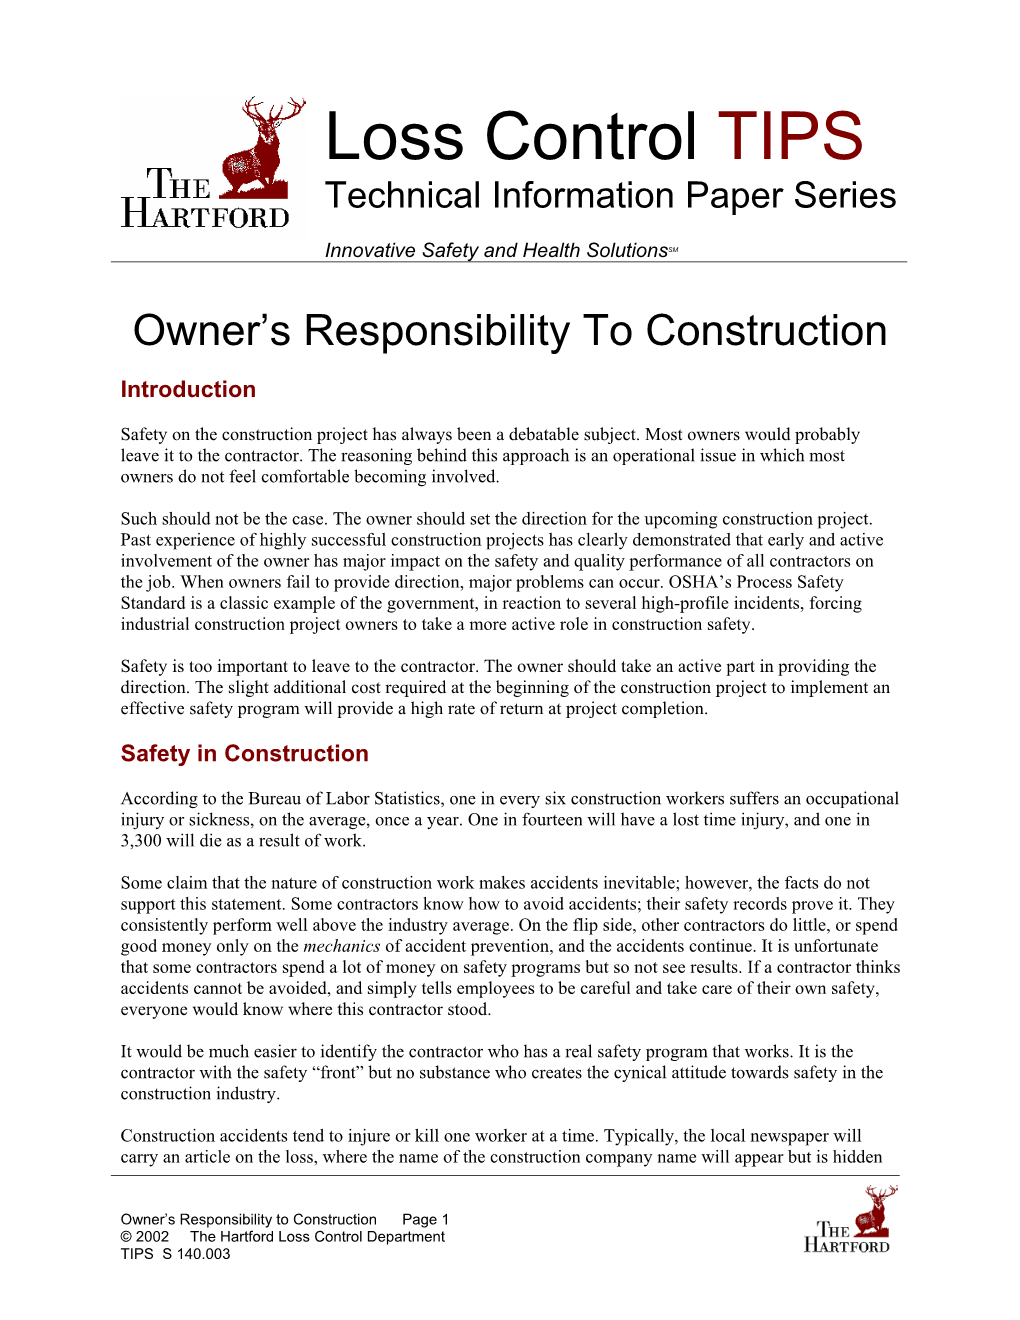 Owner's Responsibility to Construction